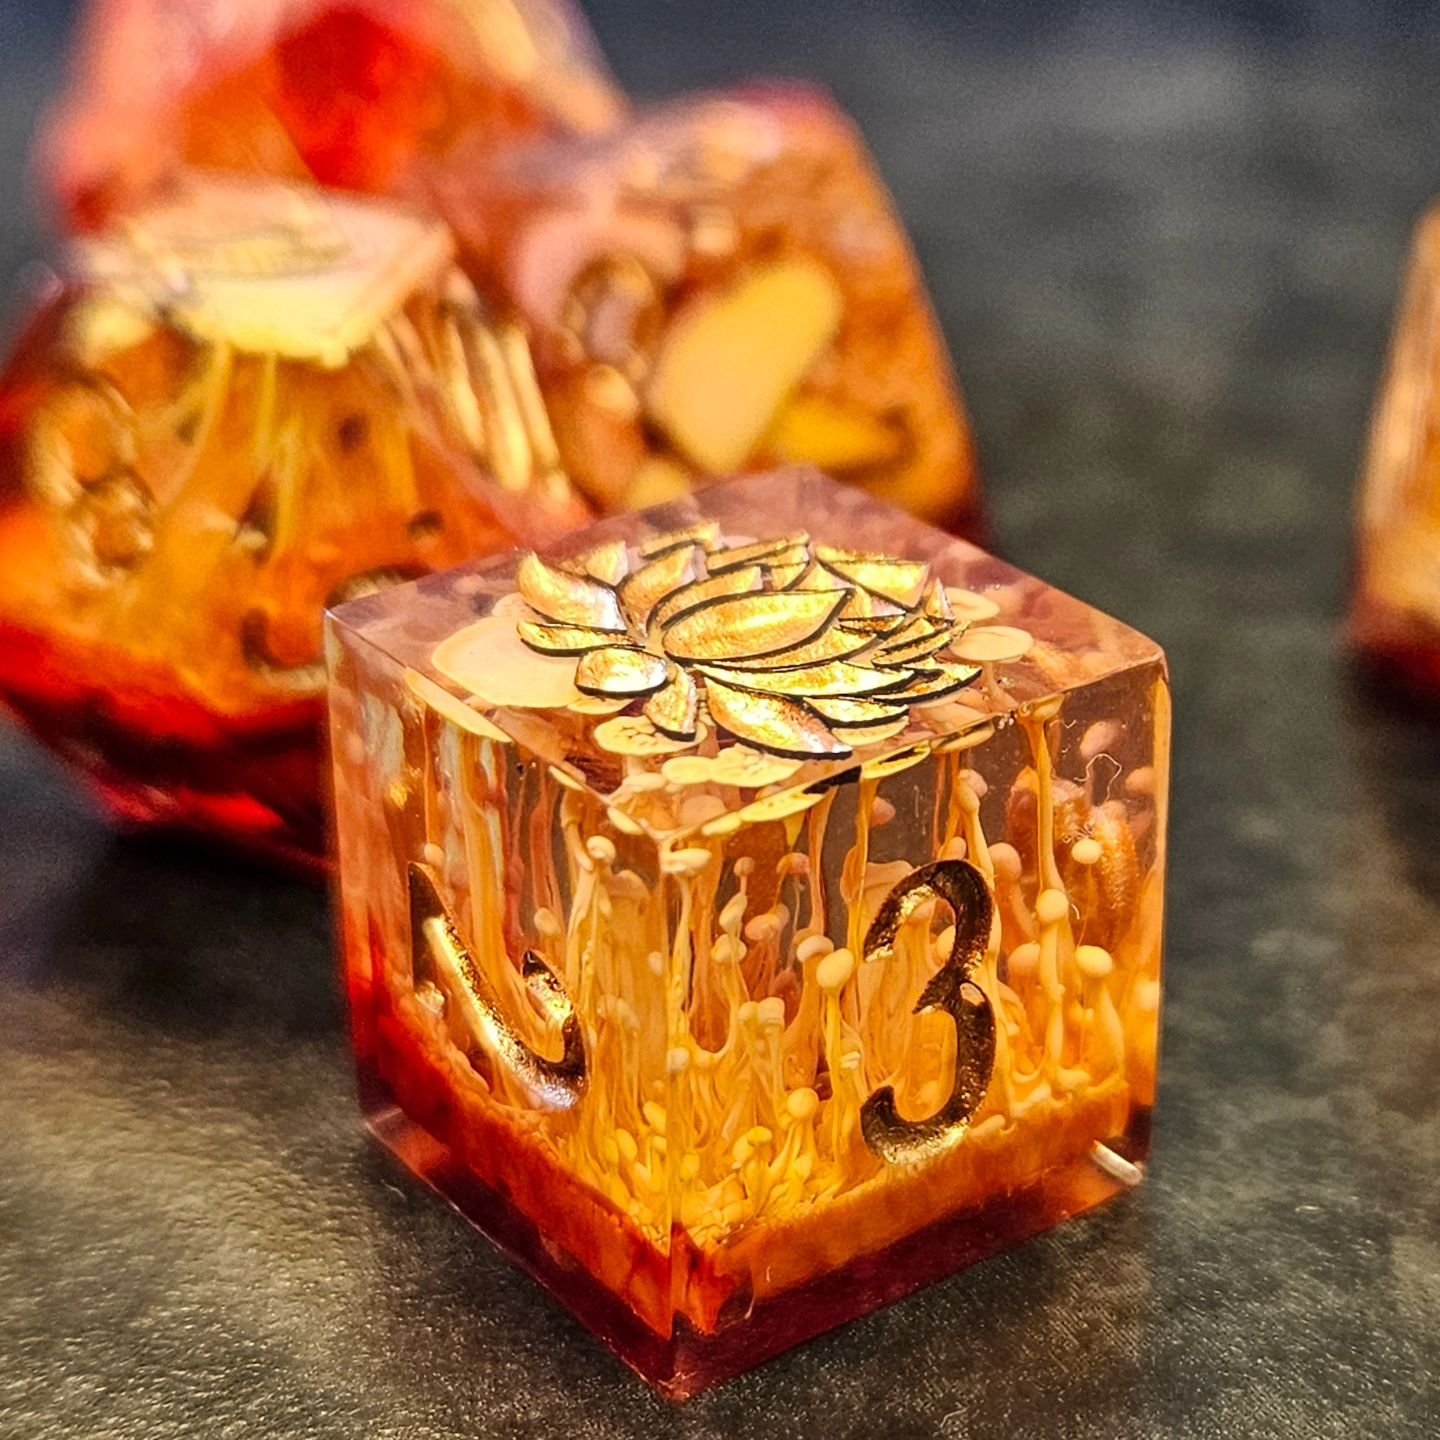 The latest shop drop is here! Head over to my website to pick up some unique fate rocks 👀 link in bio
Underdark Mycelium ○ Available I'm two sets
&deg;
#dice  #diceset #dicemaking #dicegoblin #dnddice #dnd5e #dnd